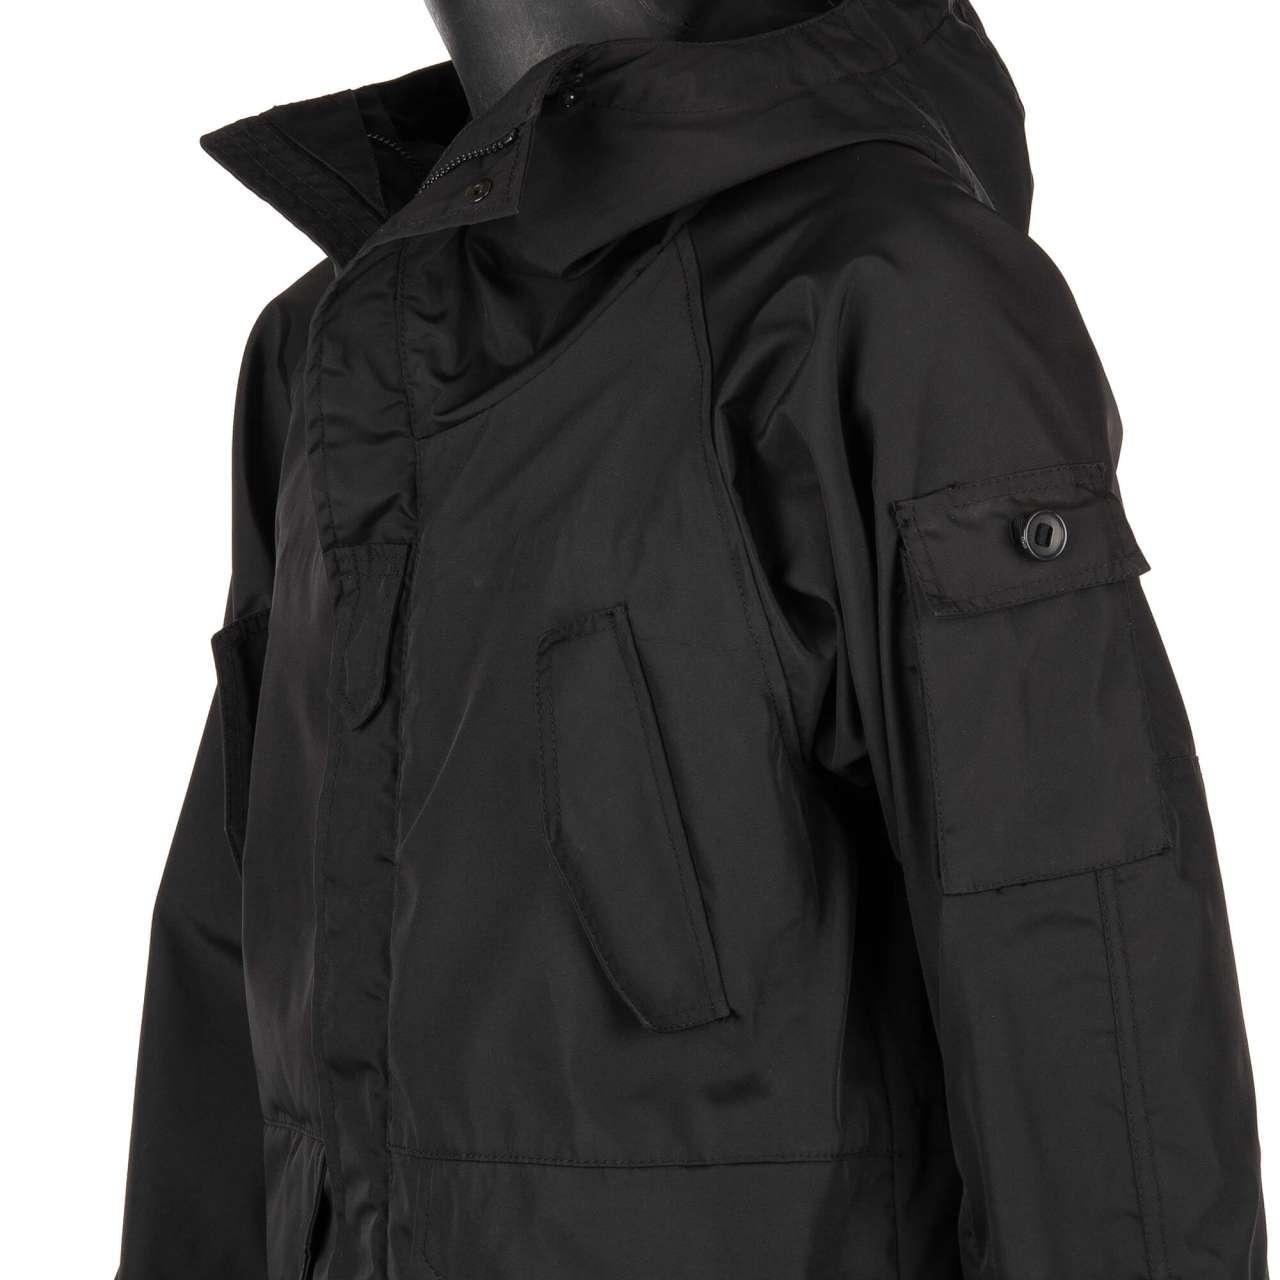 Dolce & Gabbana RECCO Ski Jacket with Pockets and Hand Warmer Black 48 M In Excellent Condition For Sale In Erkrath, DE